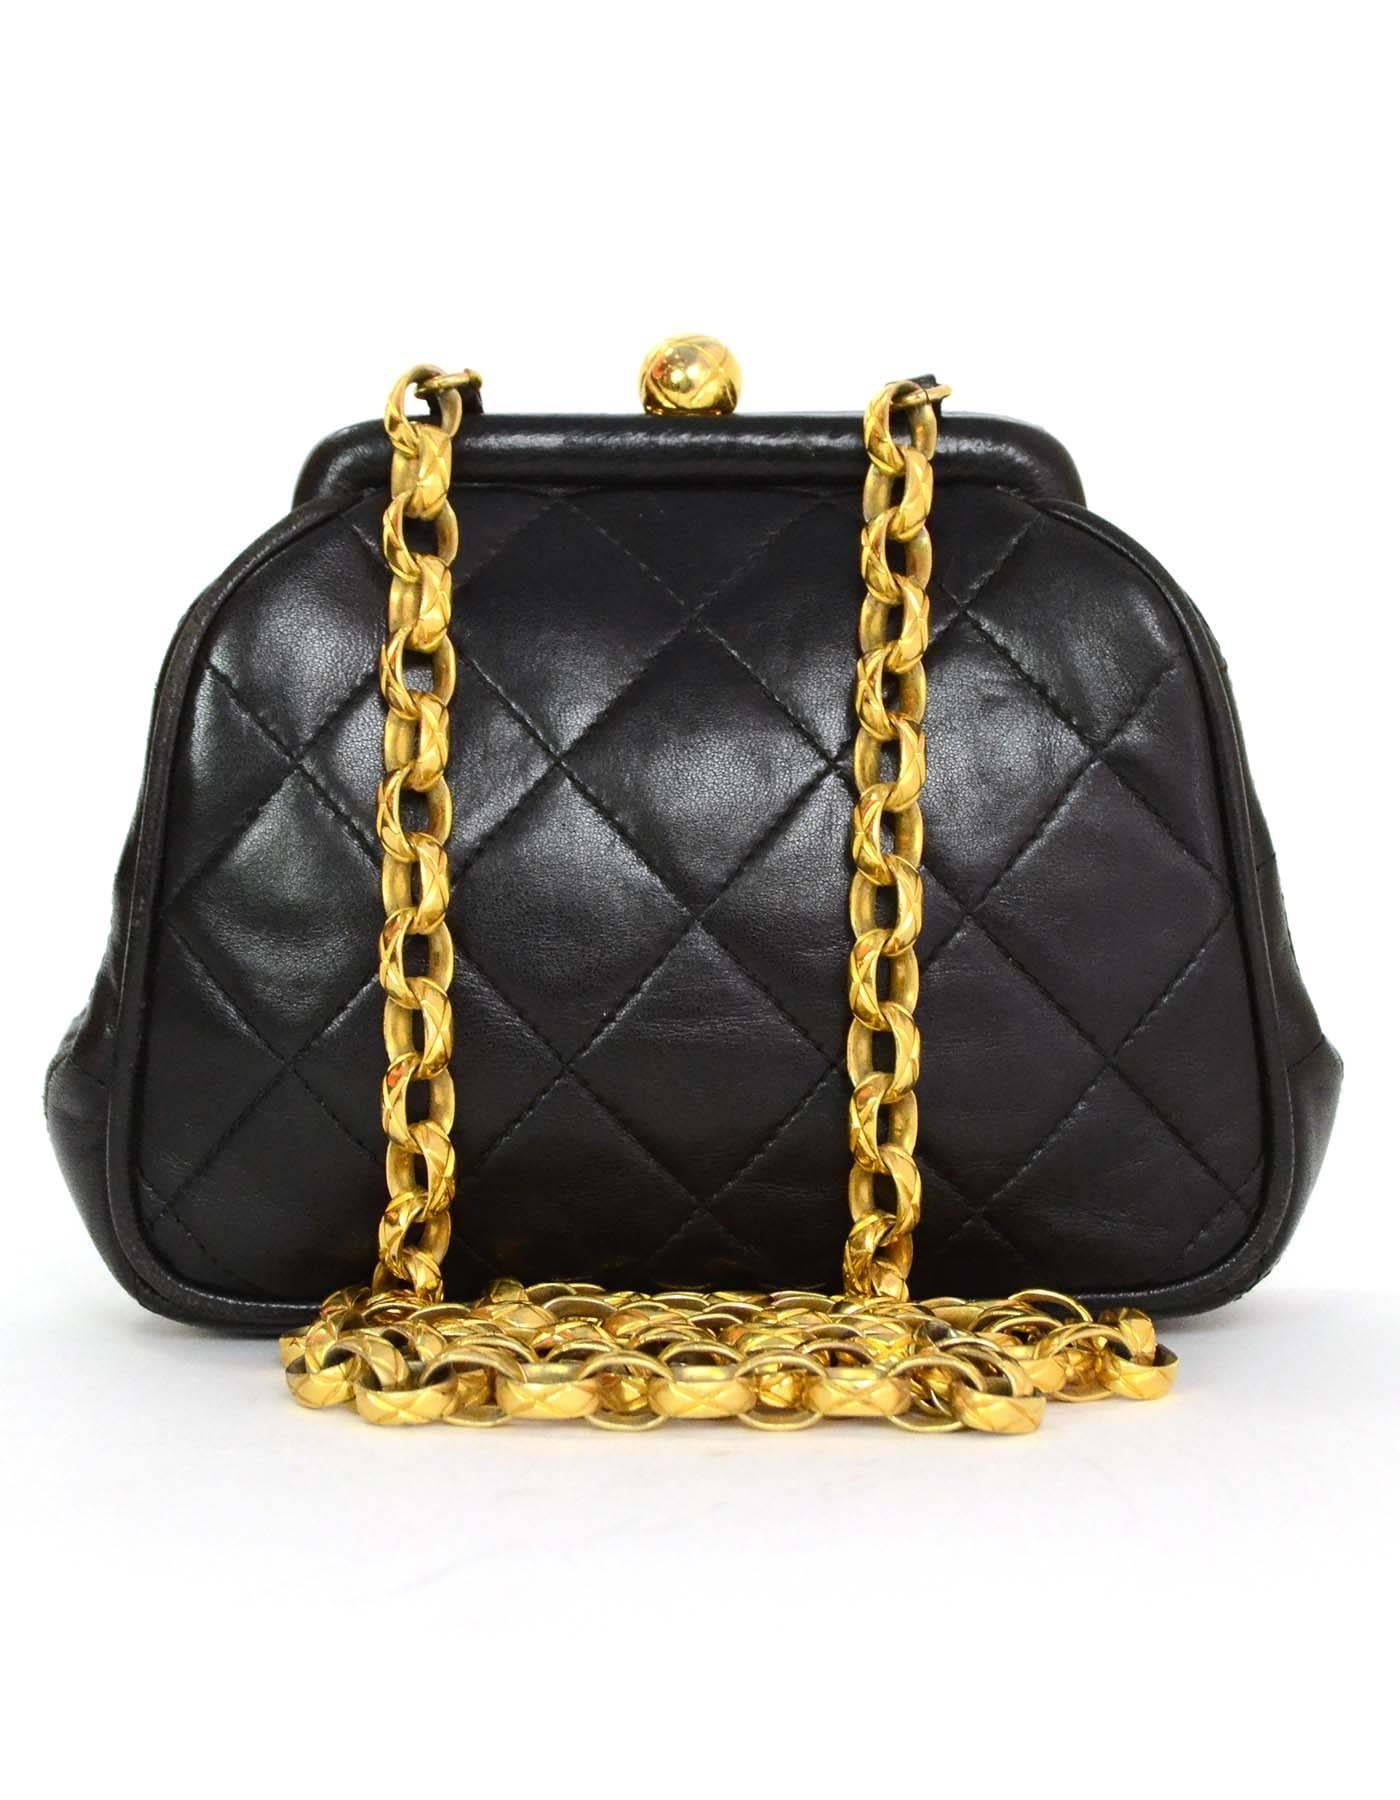 Women's Chanel Vintage Black Quilted Leather Mini CC Cross-Body with GHW